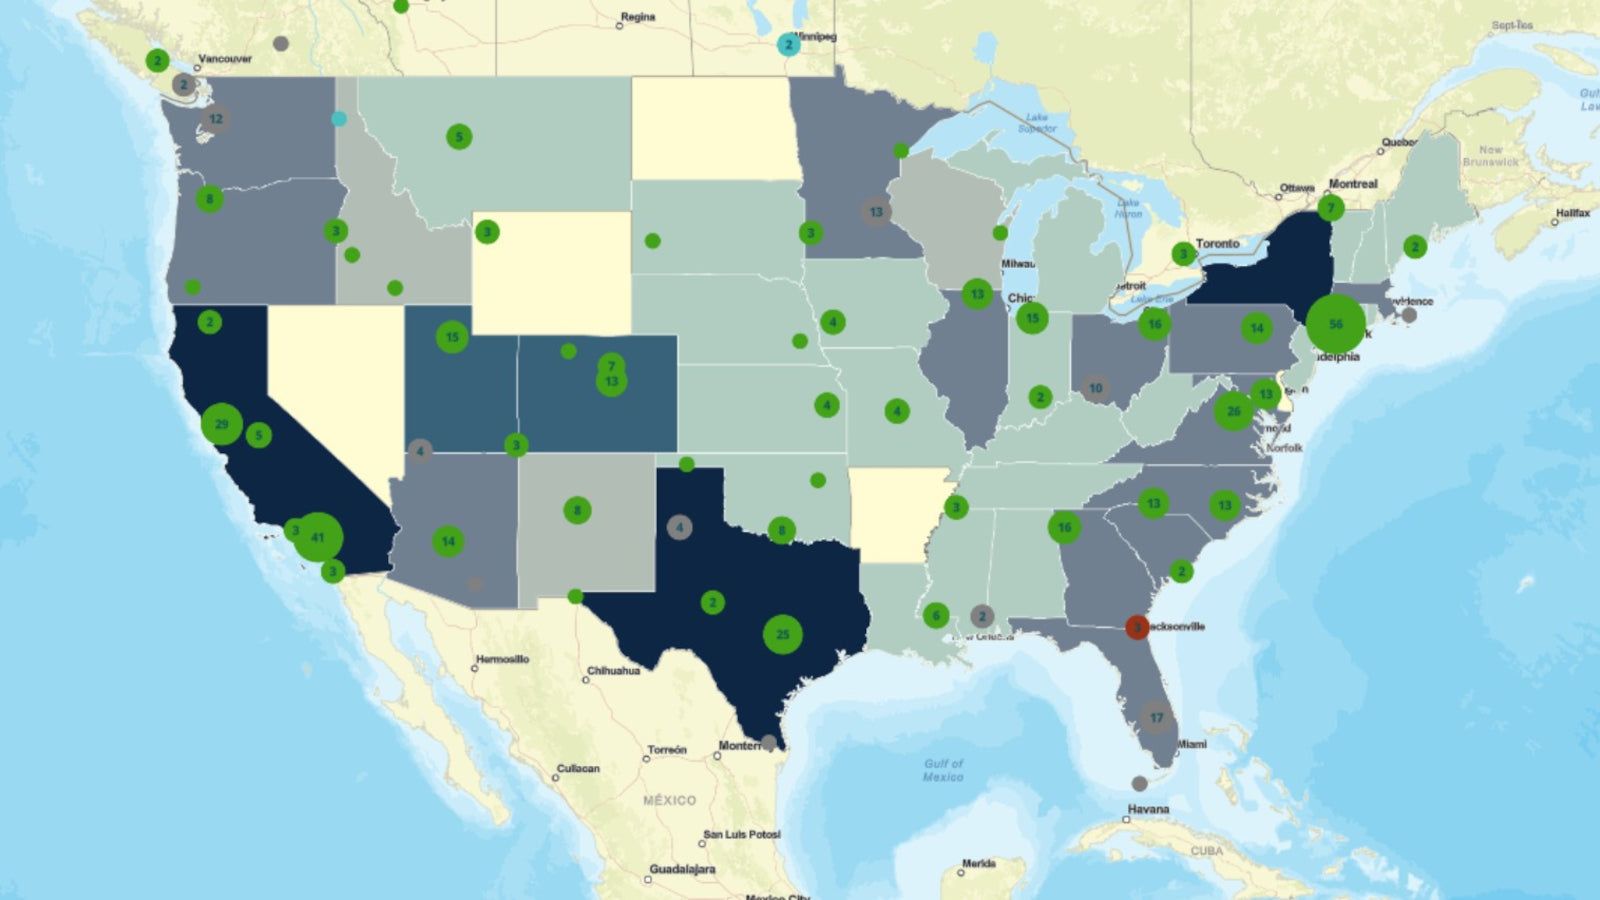 State map over United States with KPI indicators